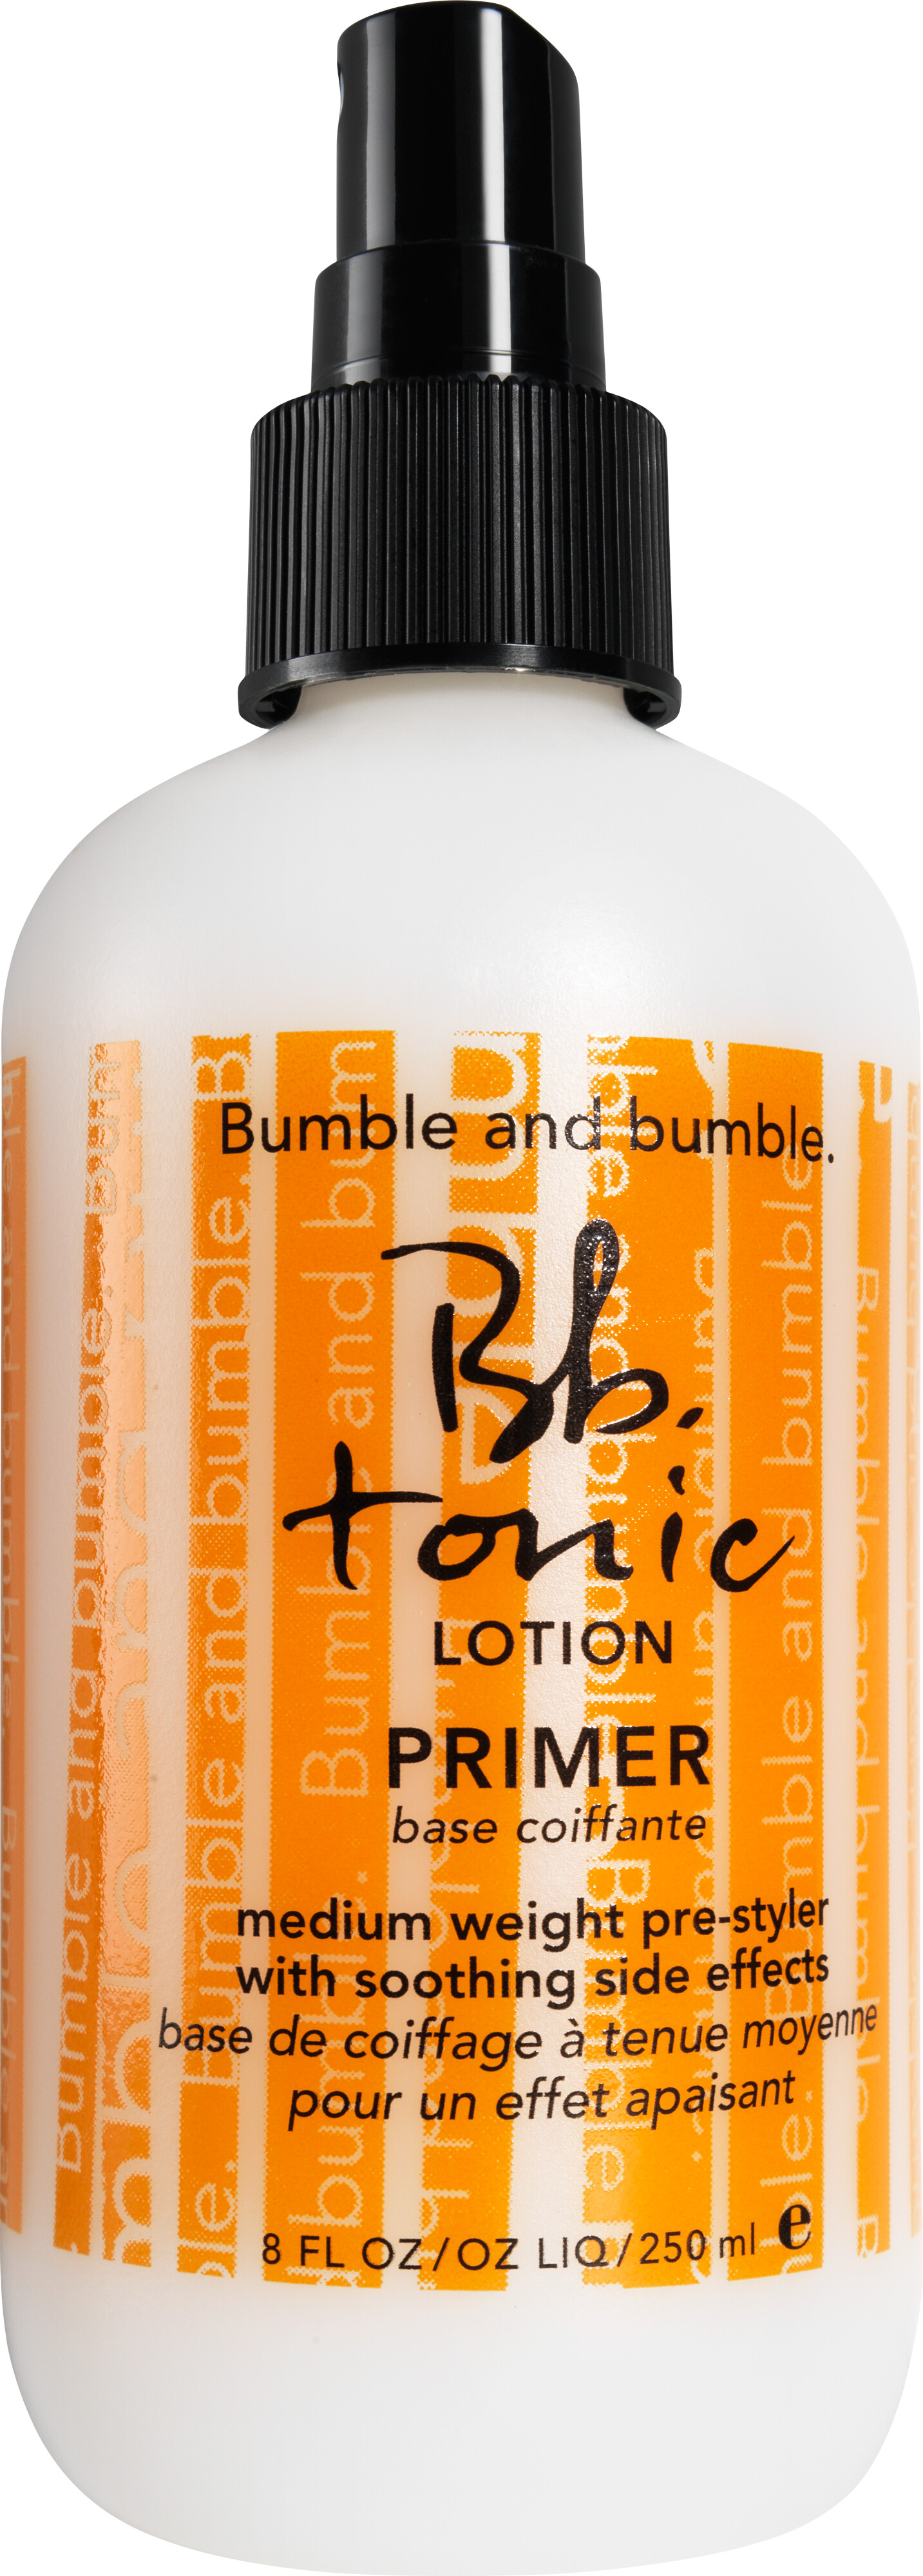 Bumble and bumble Tonic Lotion Primer Spray 250ml